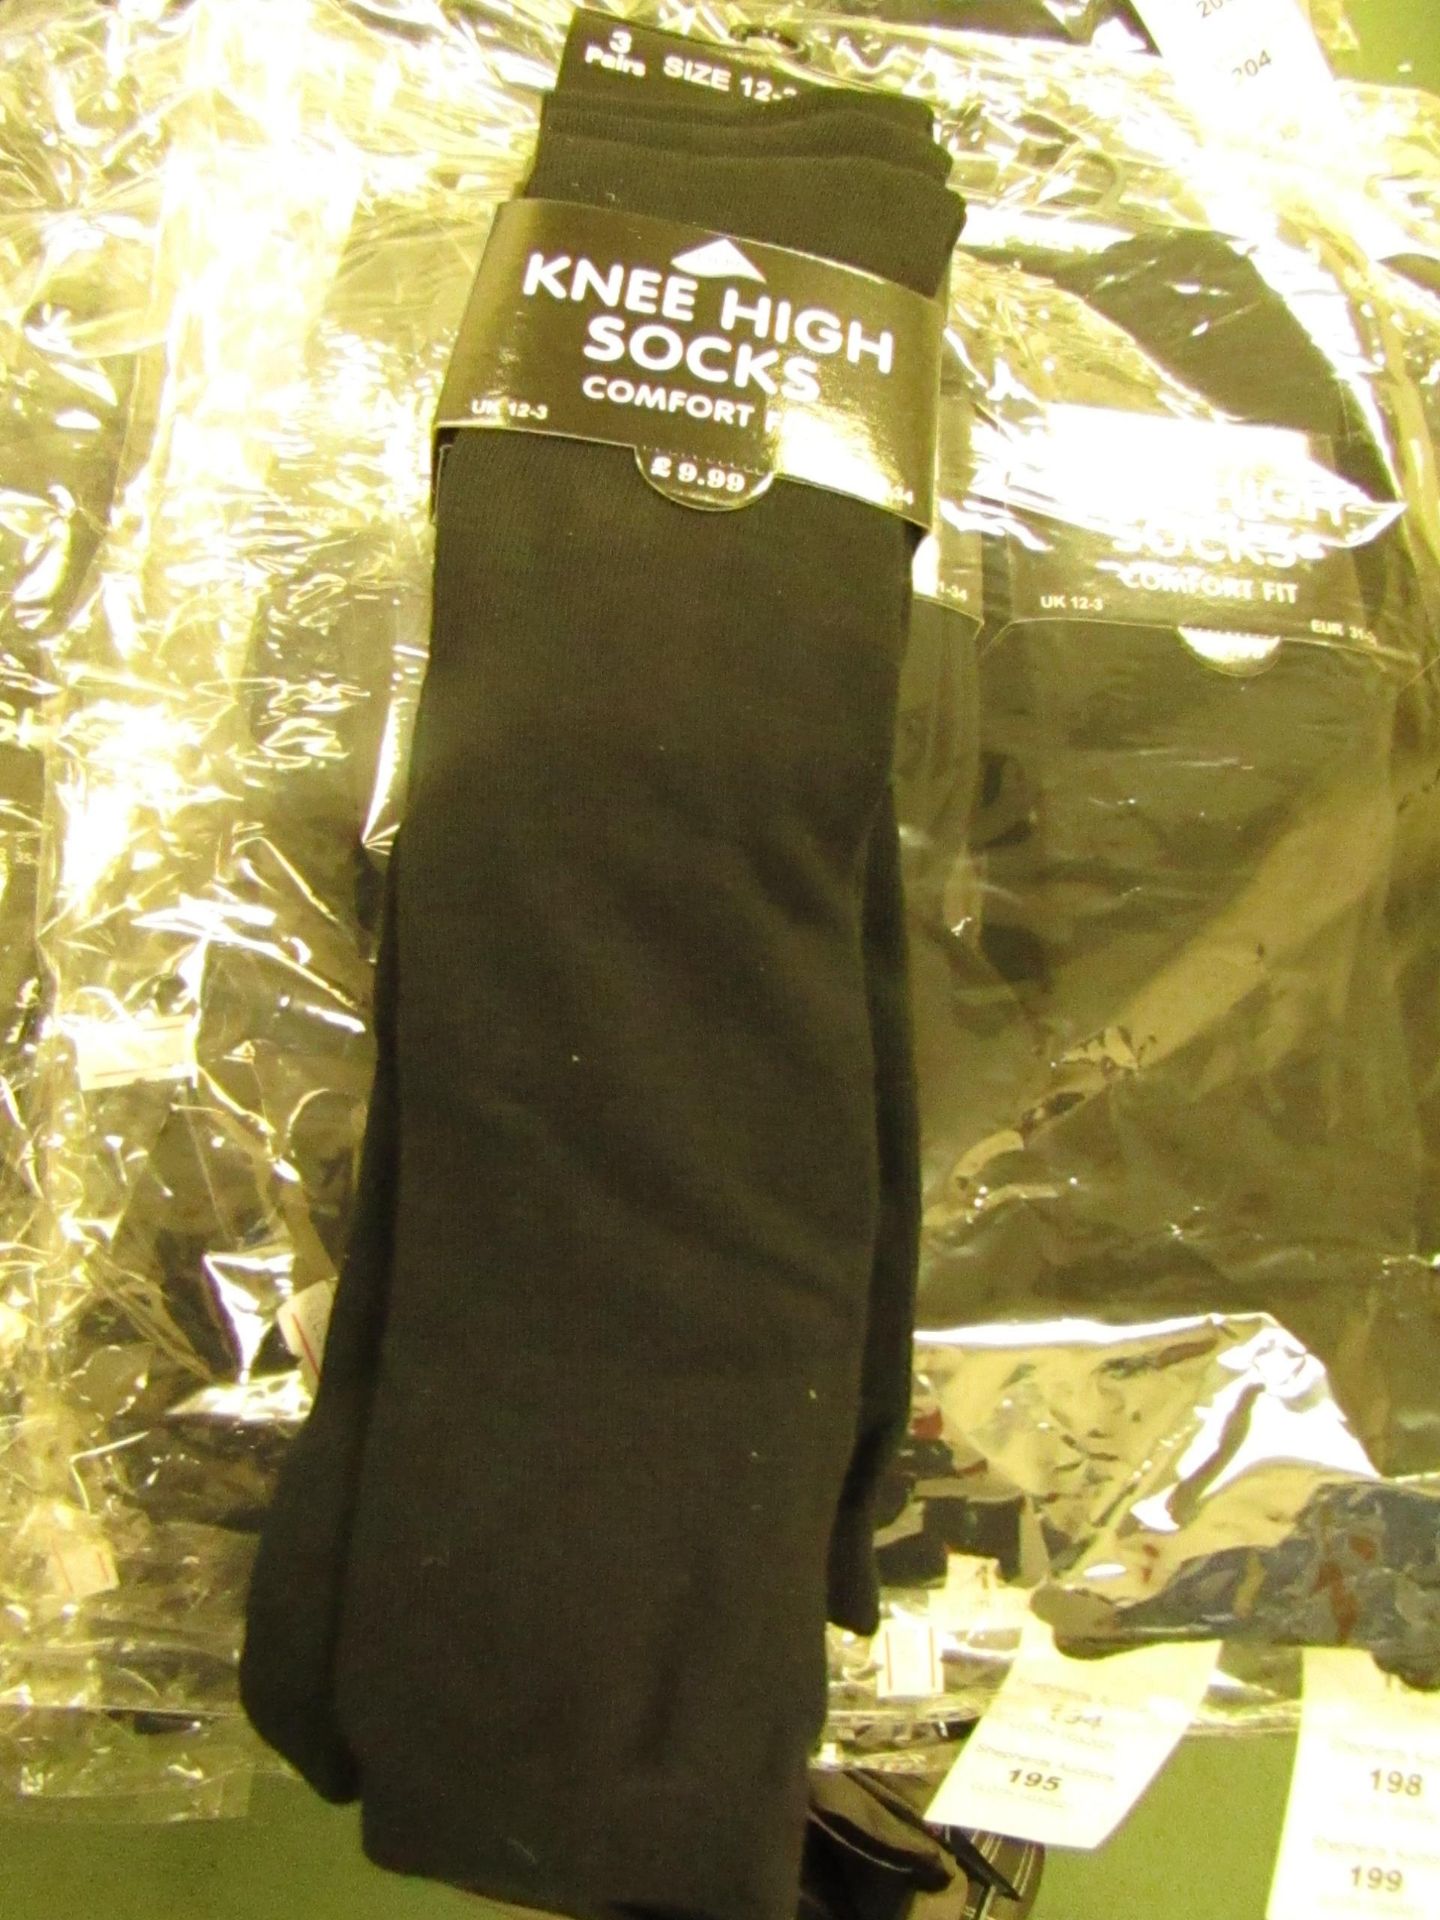 12 X Pairs of Girls Black Knee High Socks with Lycra Size 12-3 New & Packaged